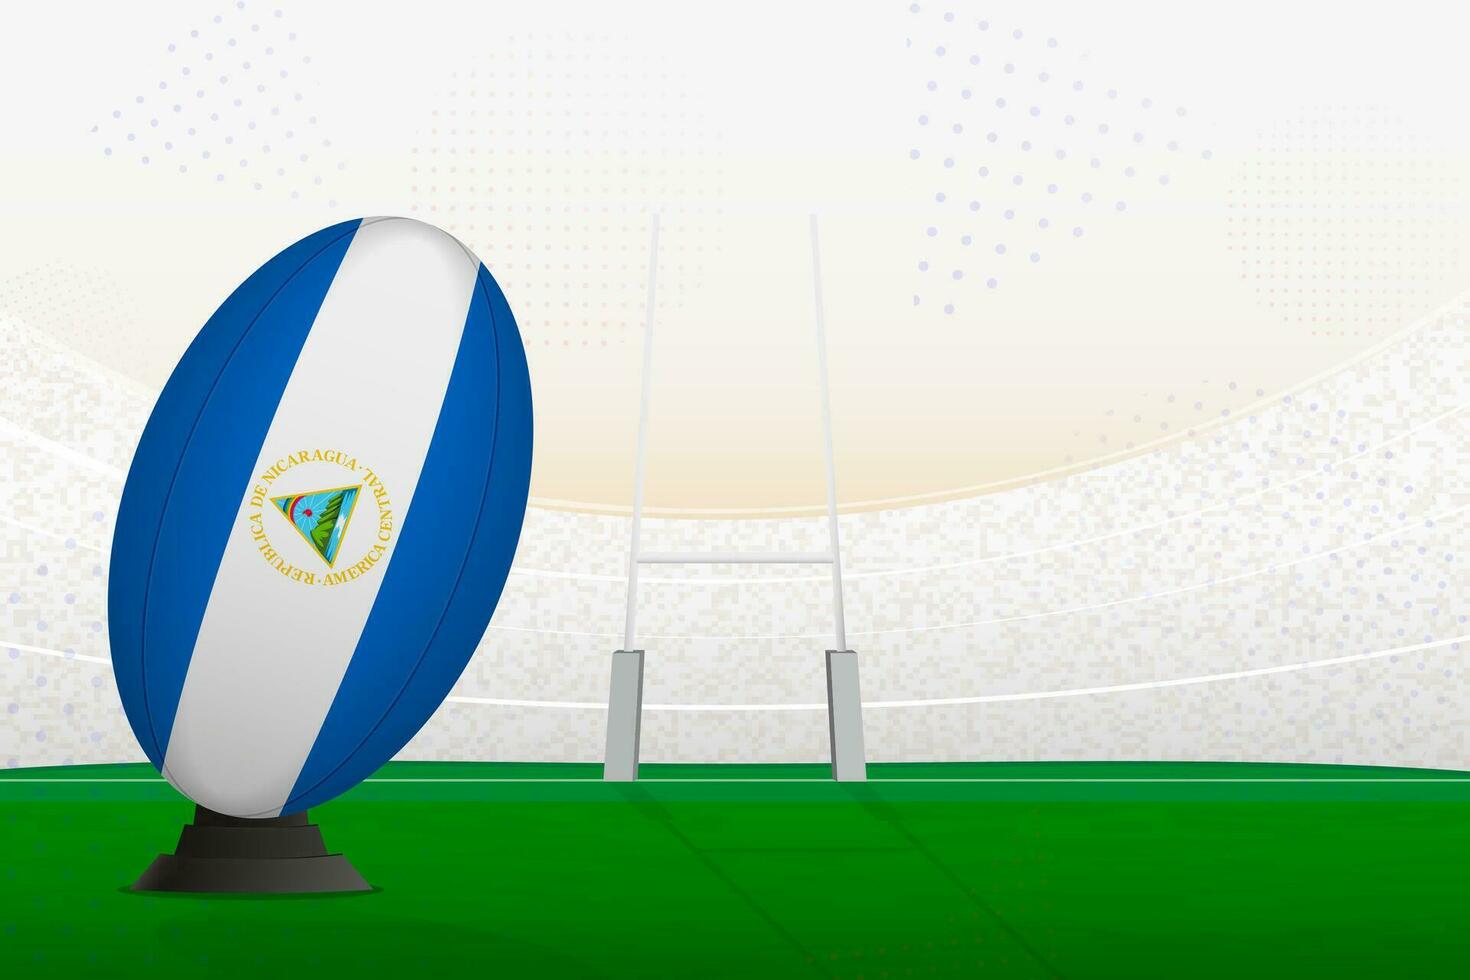 Nicaragua national team rugby ball on rugby stadium and goal posts, preparing for a penalty or free kick. vector